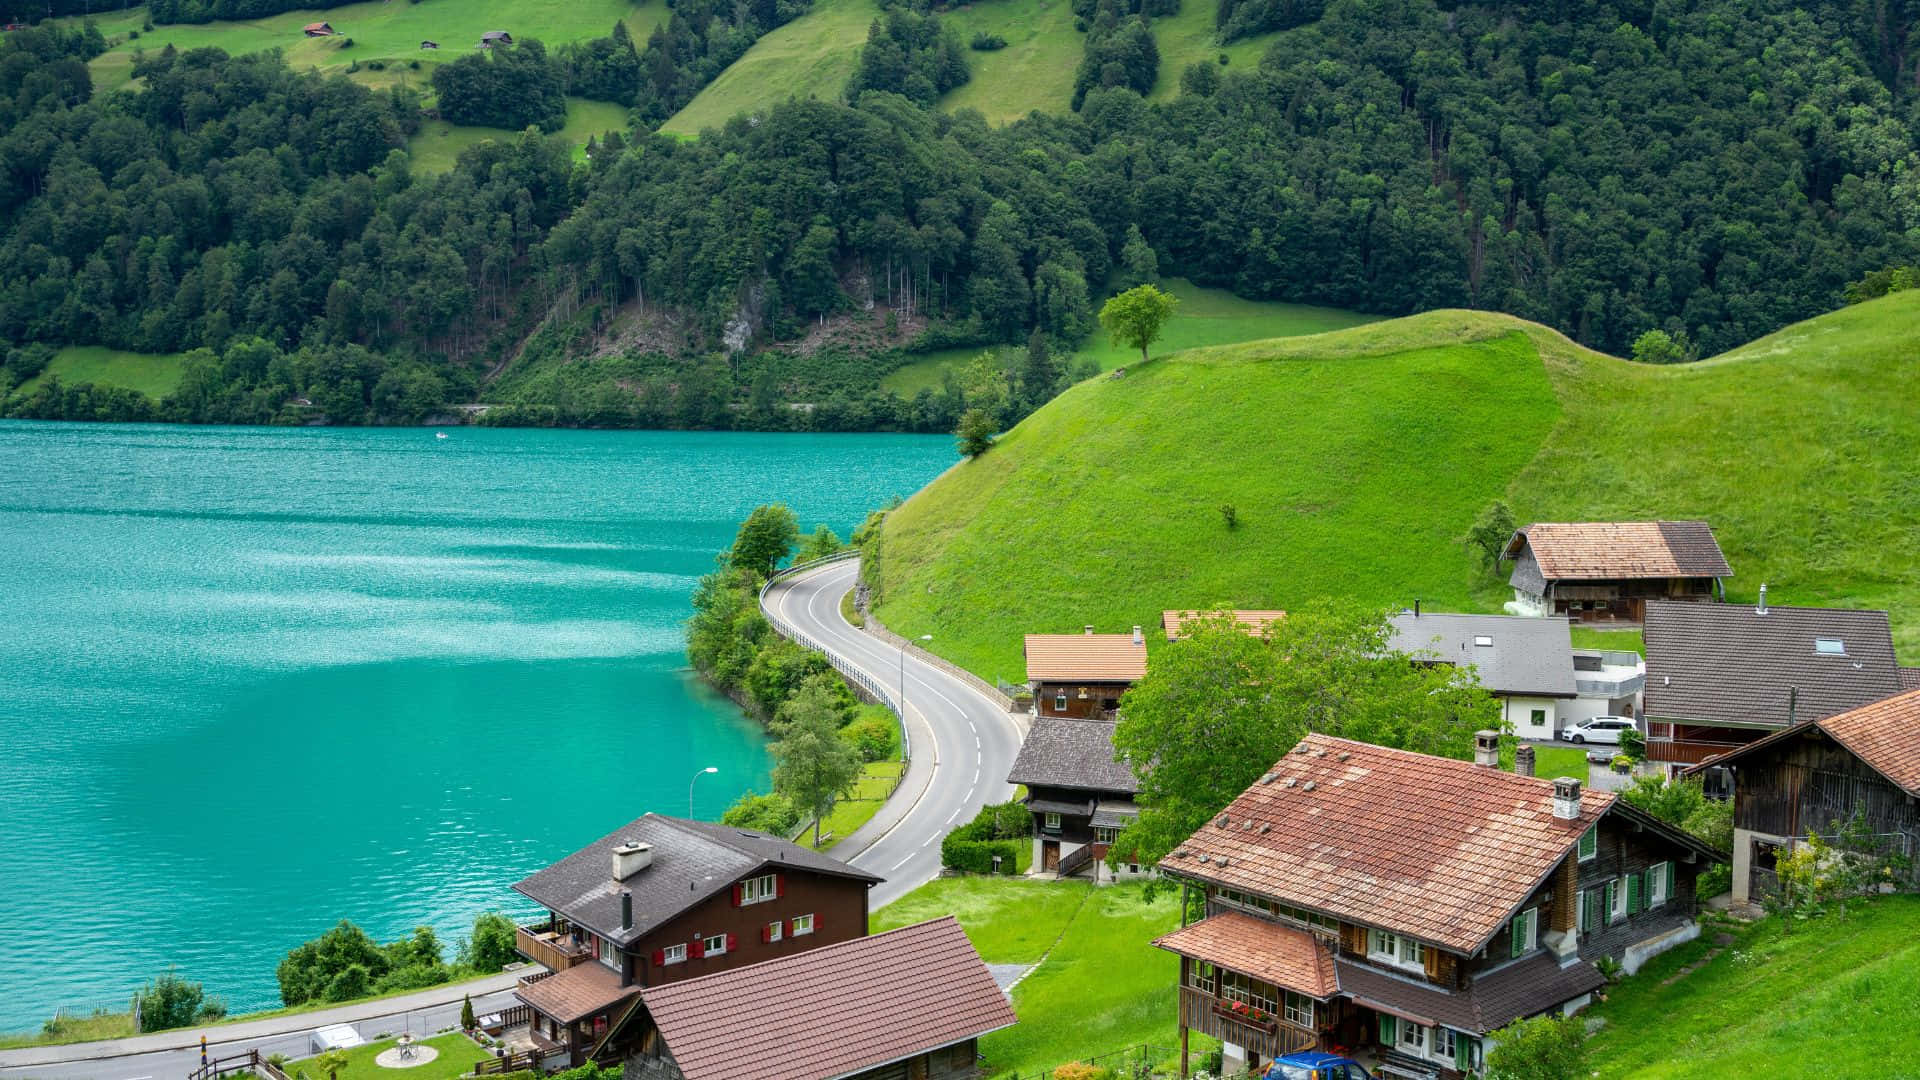 Idyllic Swiss Village in the Heart of the Alps